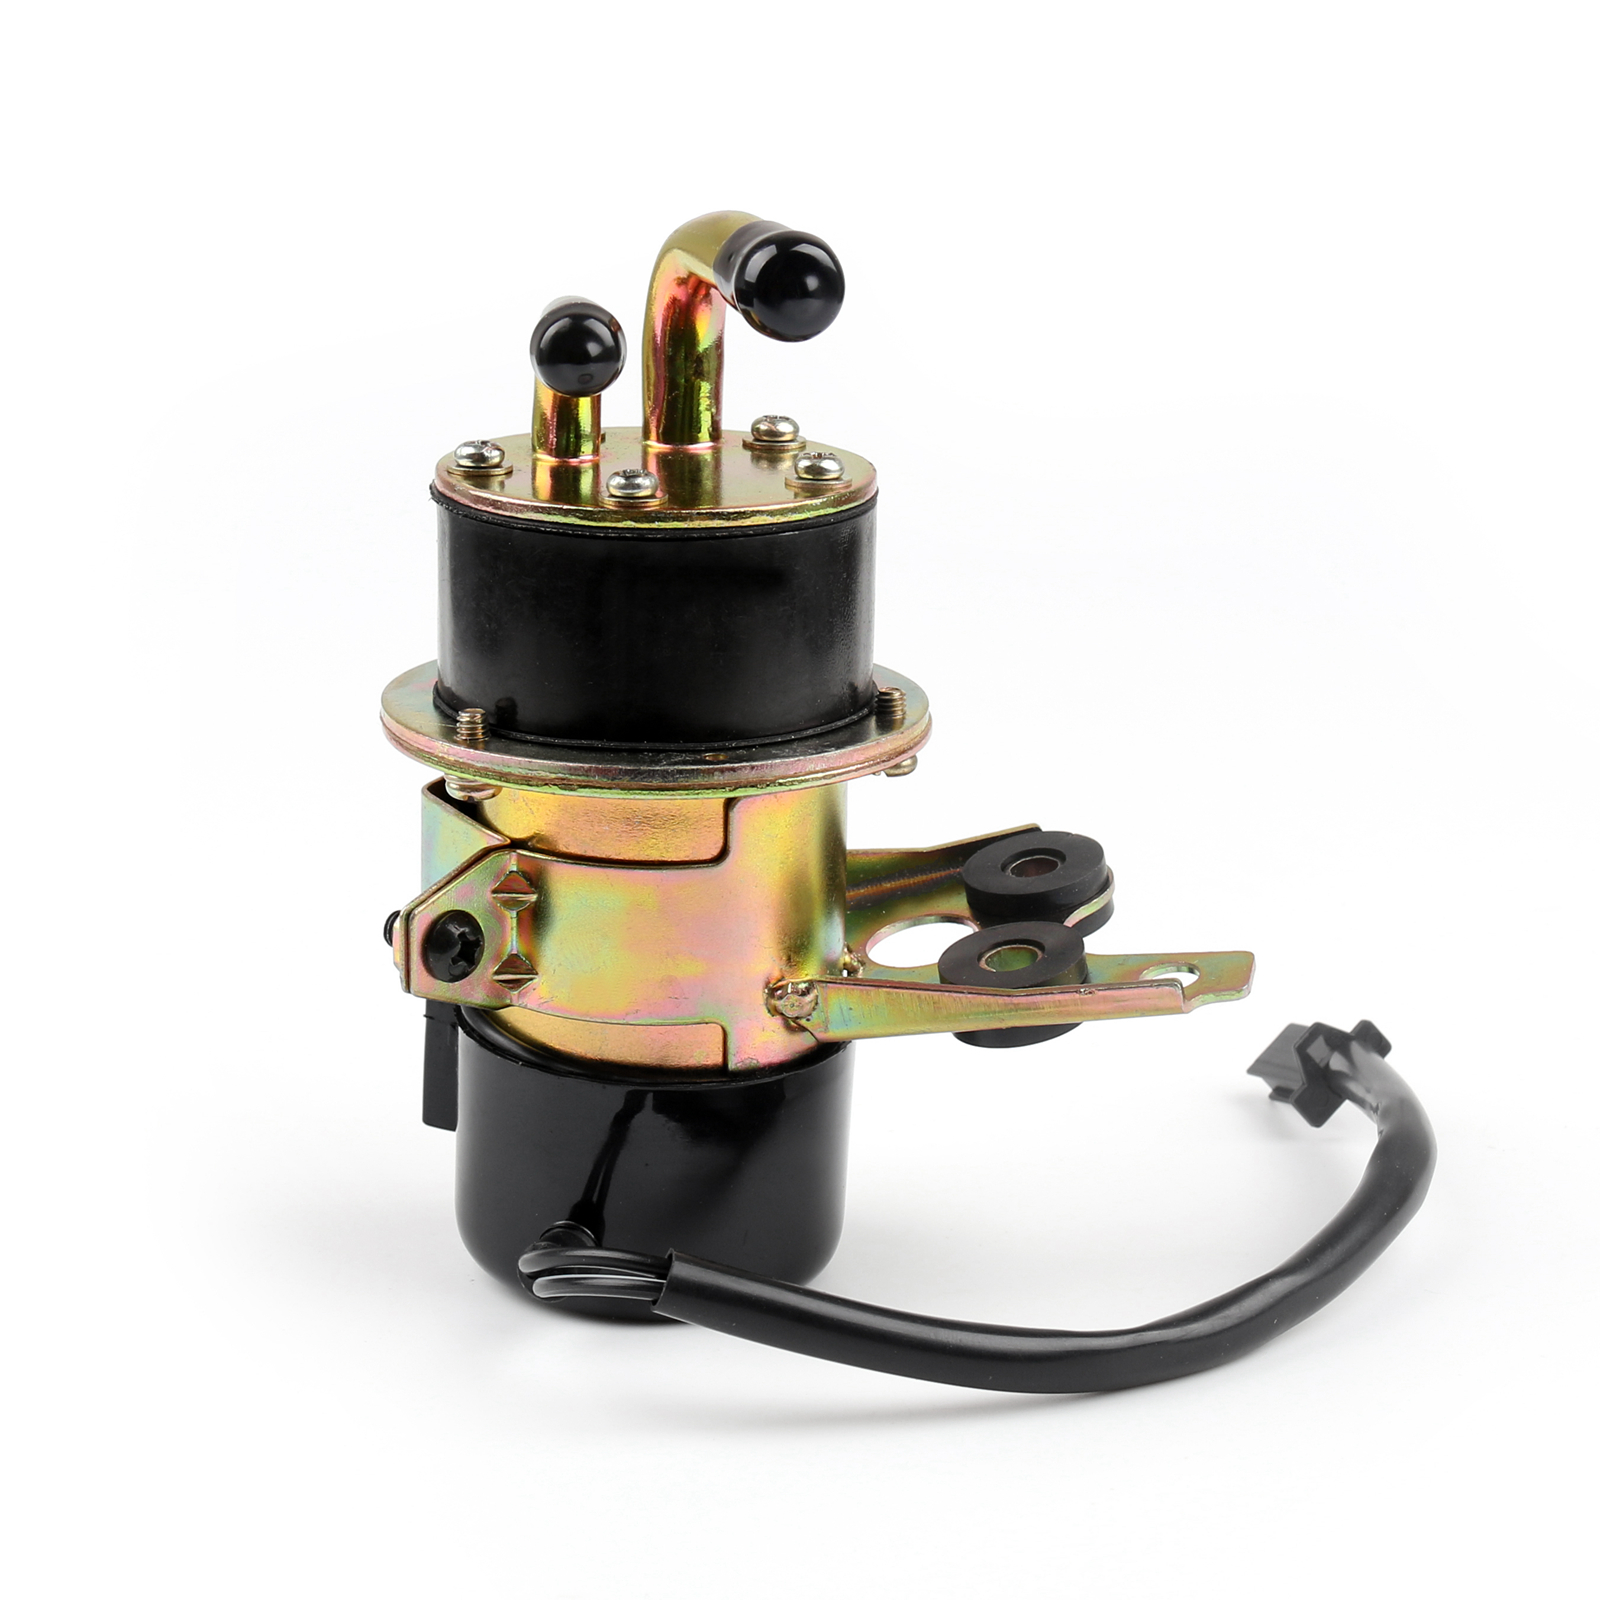 Motor Genic New Fuel Pump For Yamaha YZF R1 YZF-R1 1998 1999 2000 2001 YZF1000R 1997 - image 1 of 5